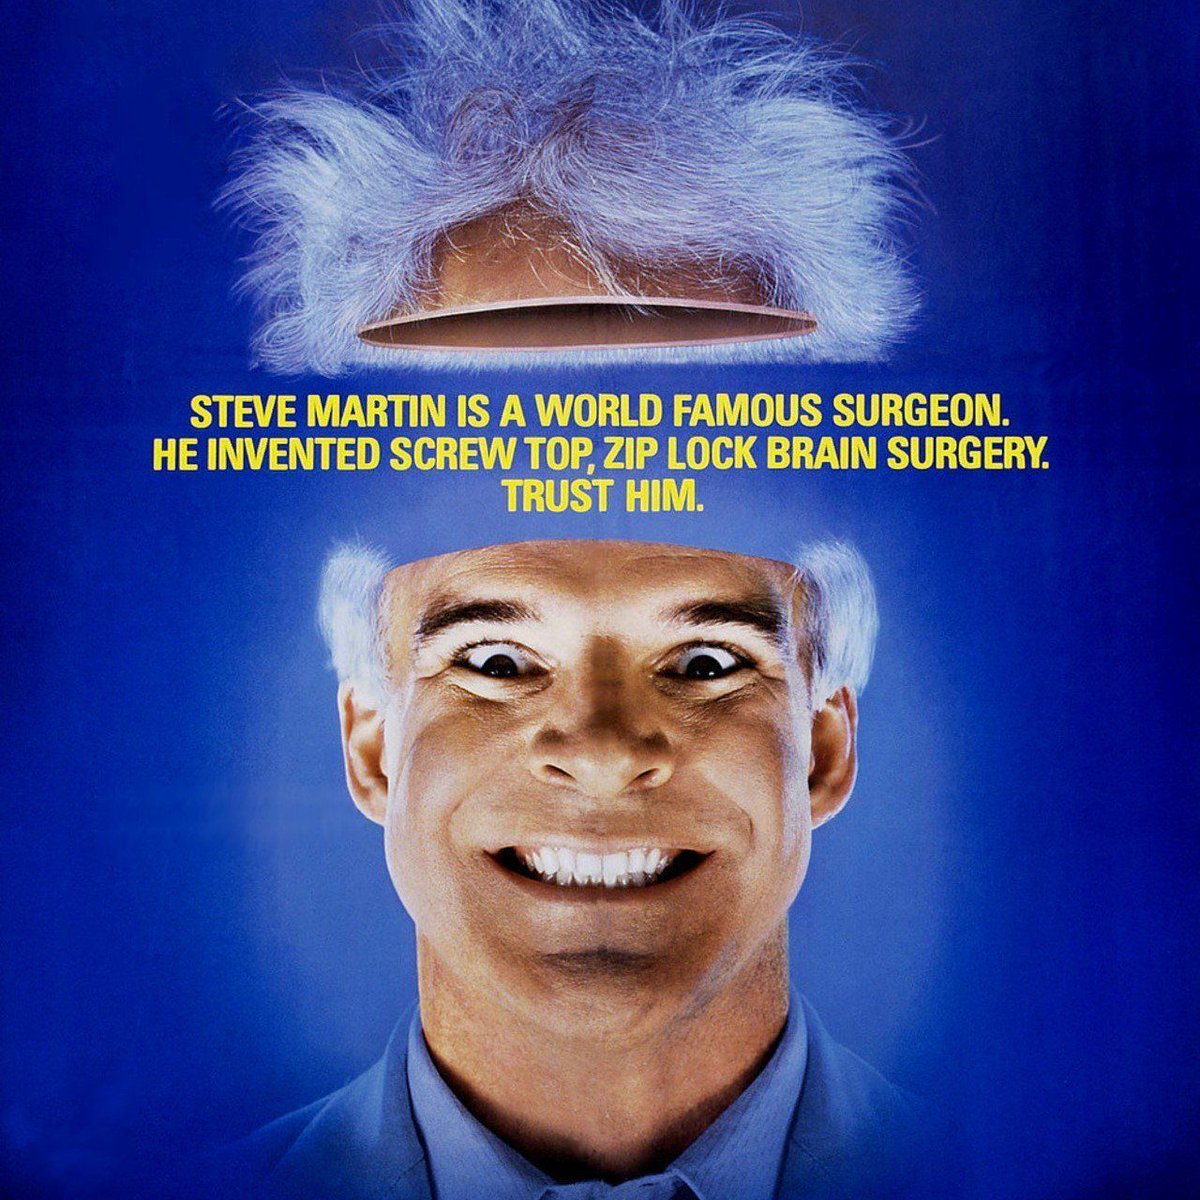 Just added! THE MAN WITH TWO BRAINS (1983) is our 35mm midnight show on May 24th & 25th! Tickets available at the box office and online: buff.ly/3xZcstn